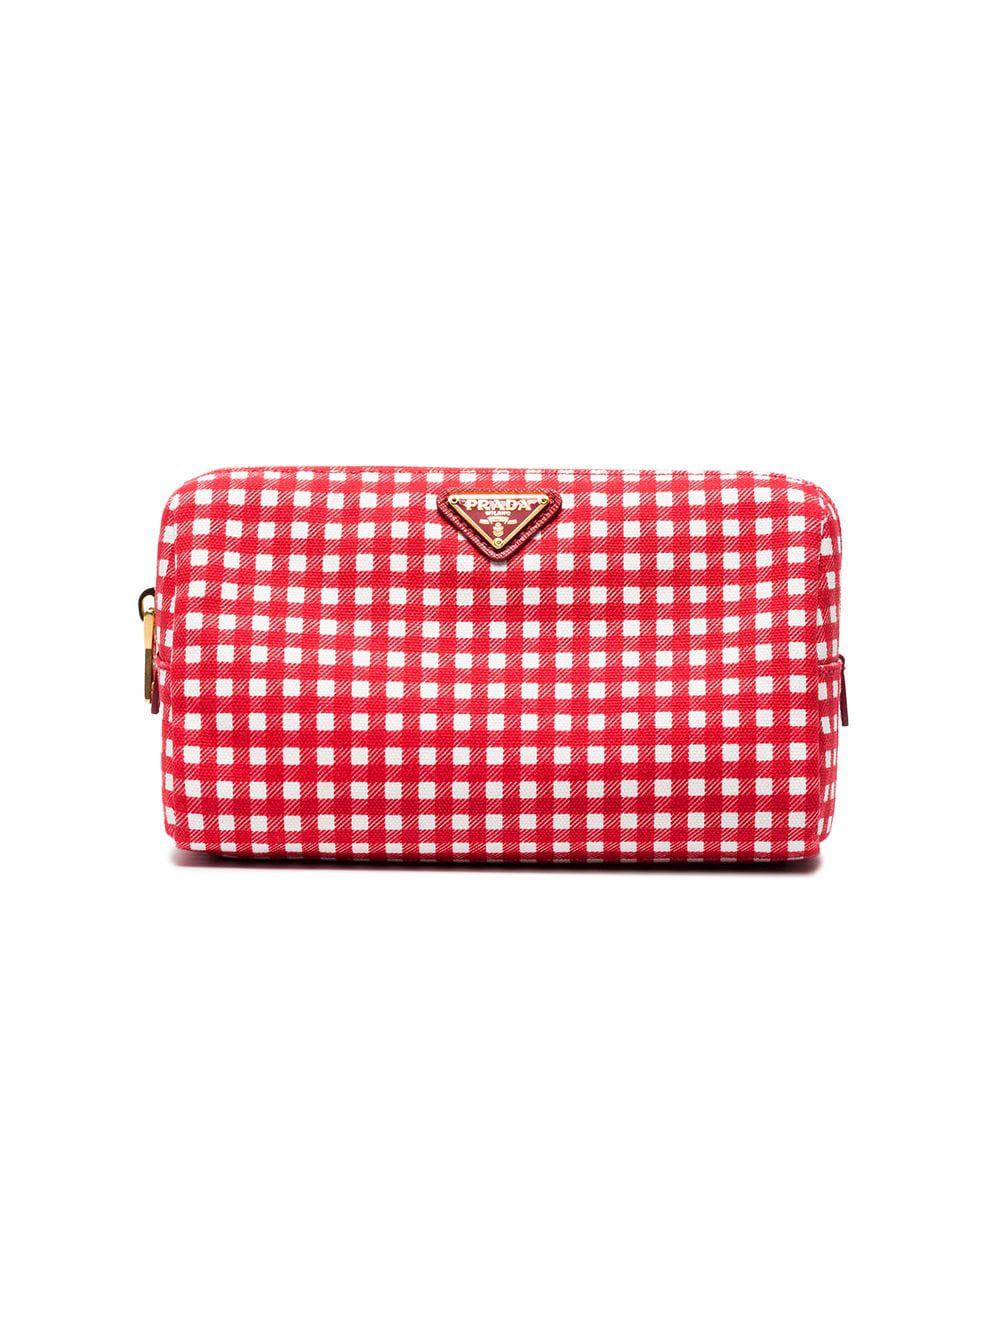 Prada Red Gingham Cotton Makeup Pouch - Lyst